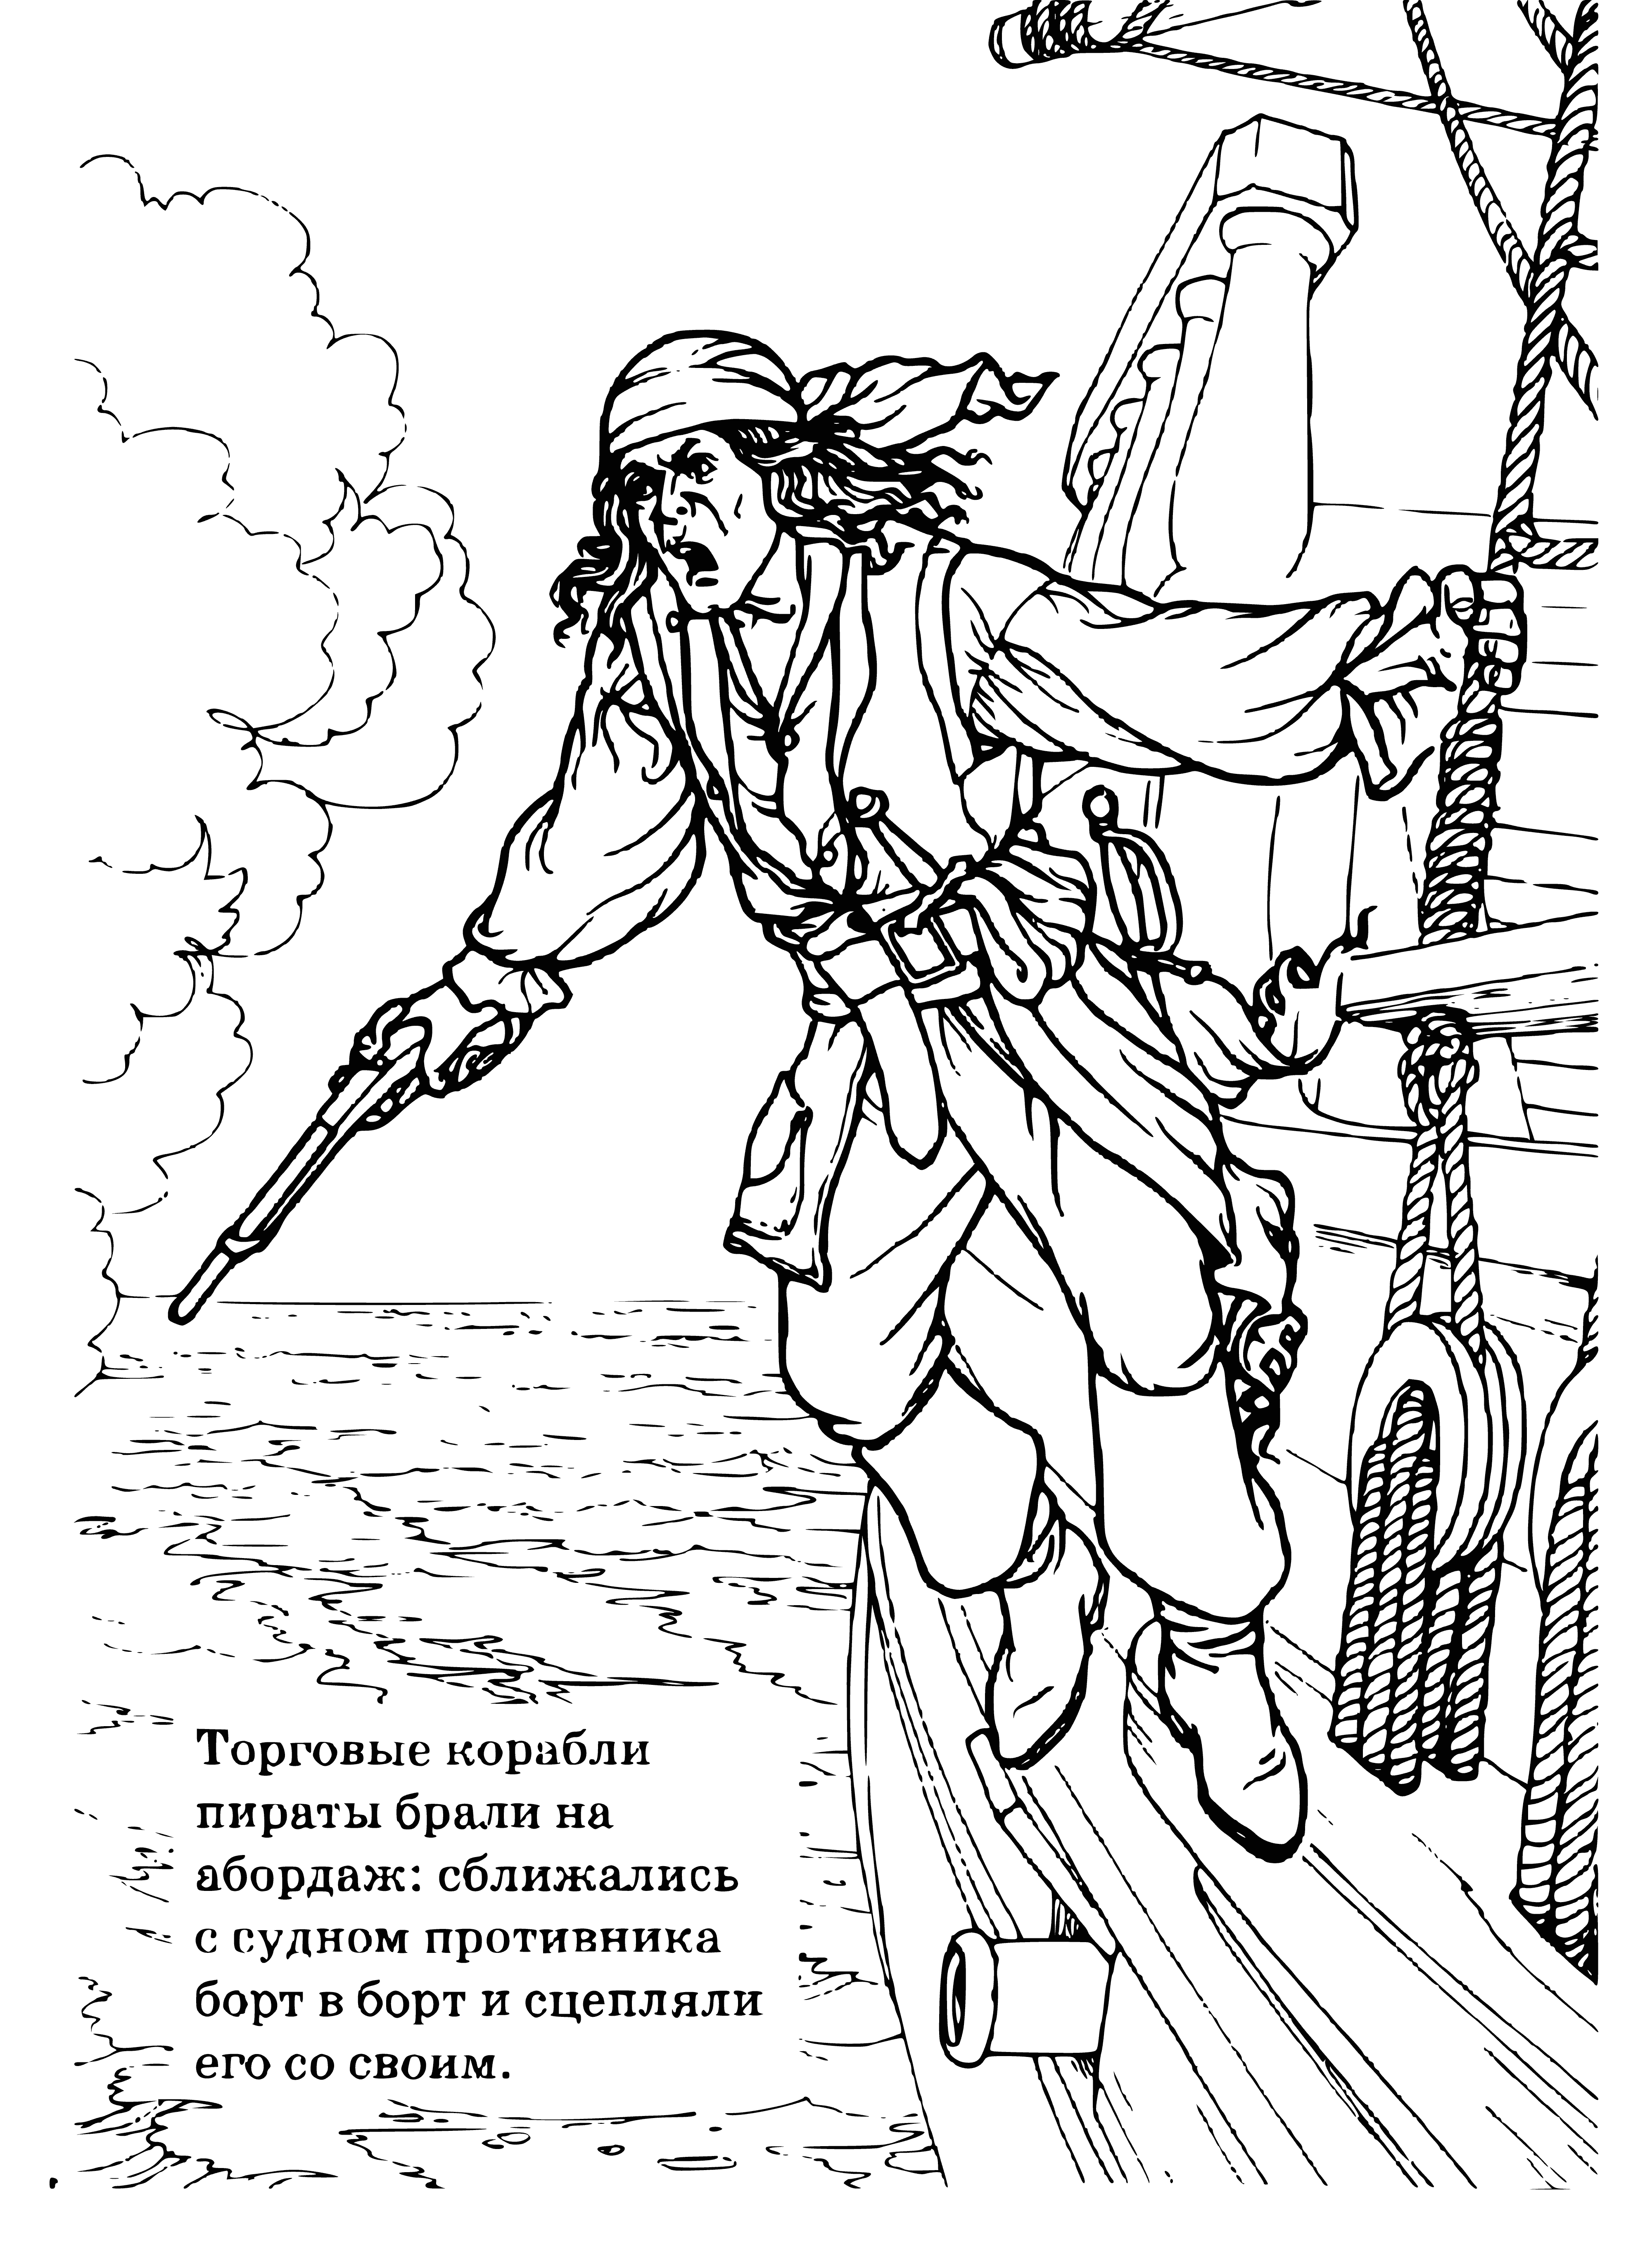 coloring page: Pirates gather on ship, armed with swords, pistols, knives and bandanas. All look mean and tough. #pirates #ships